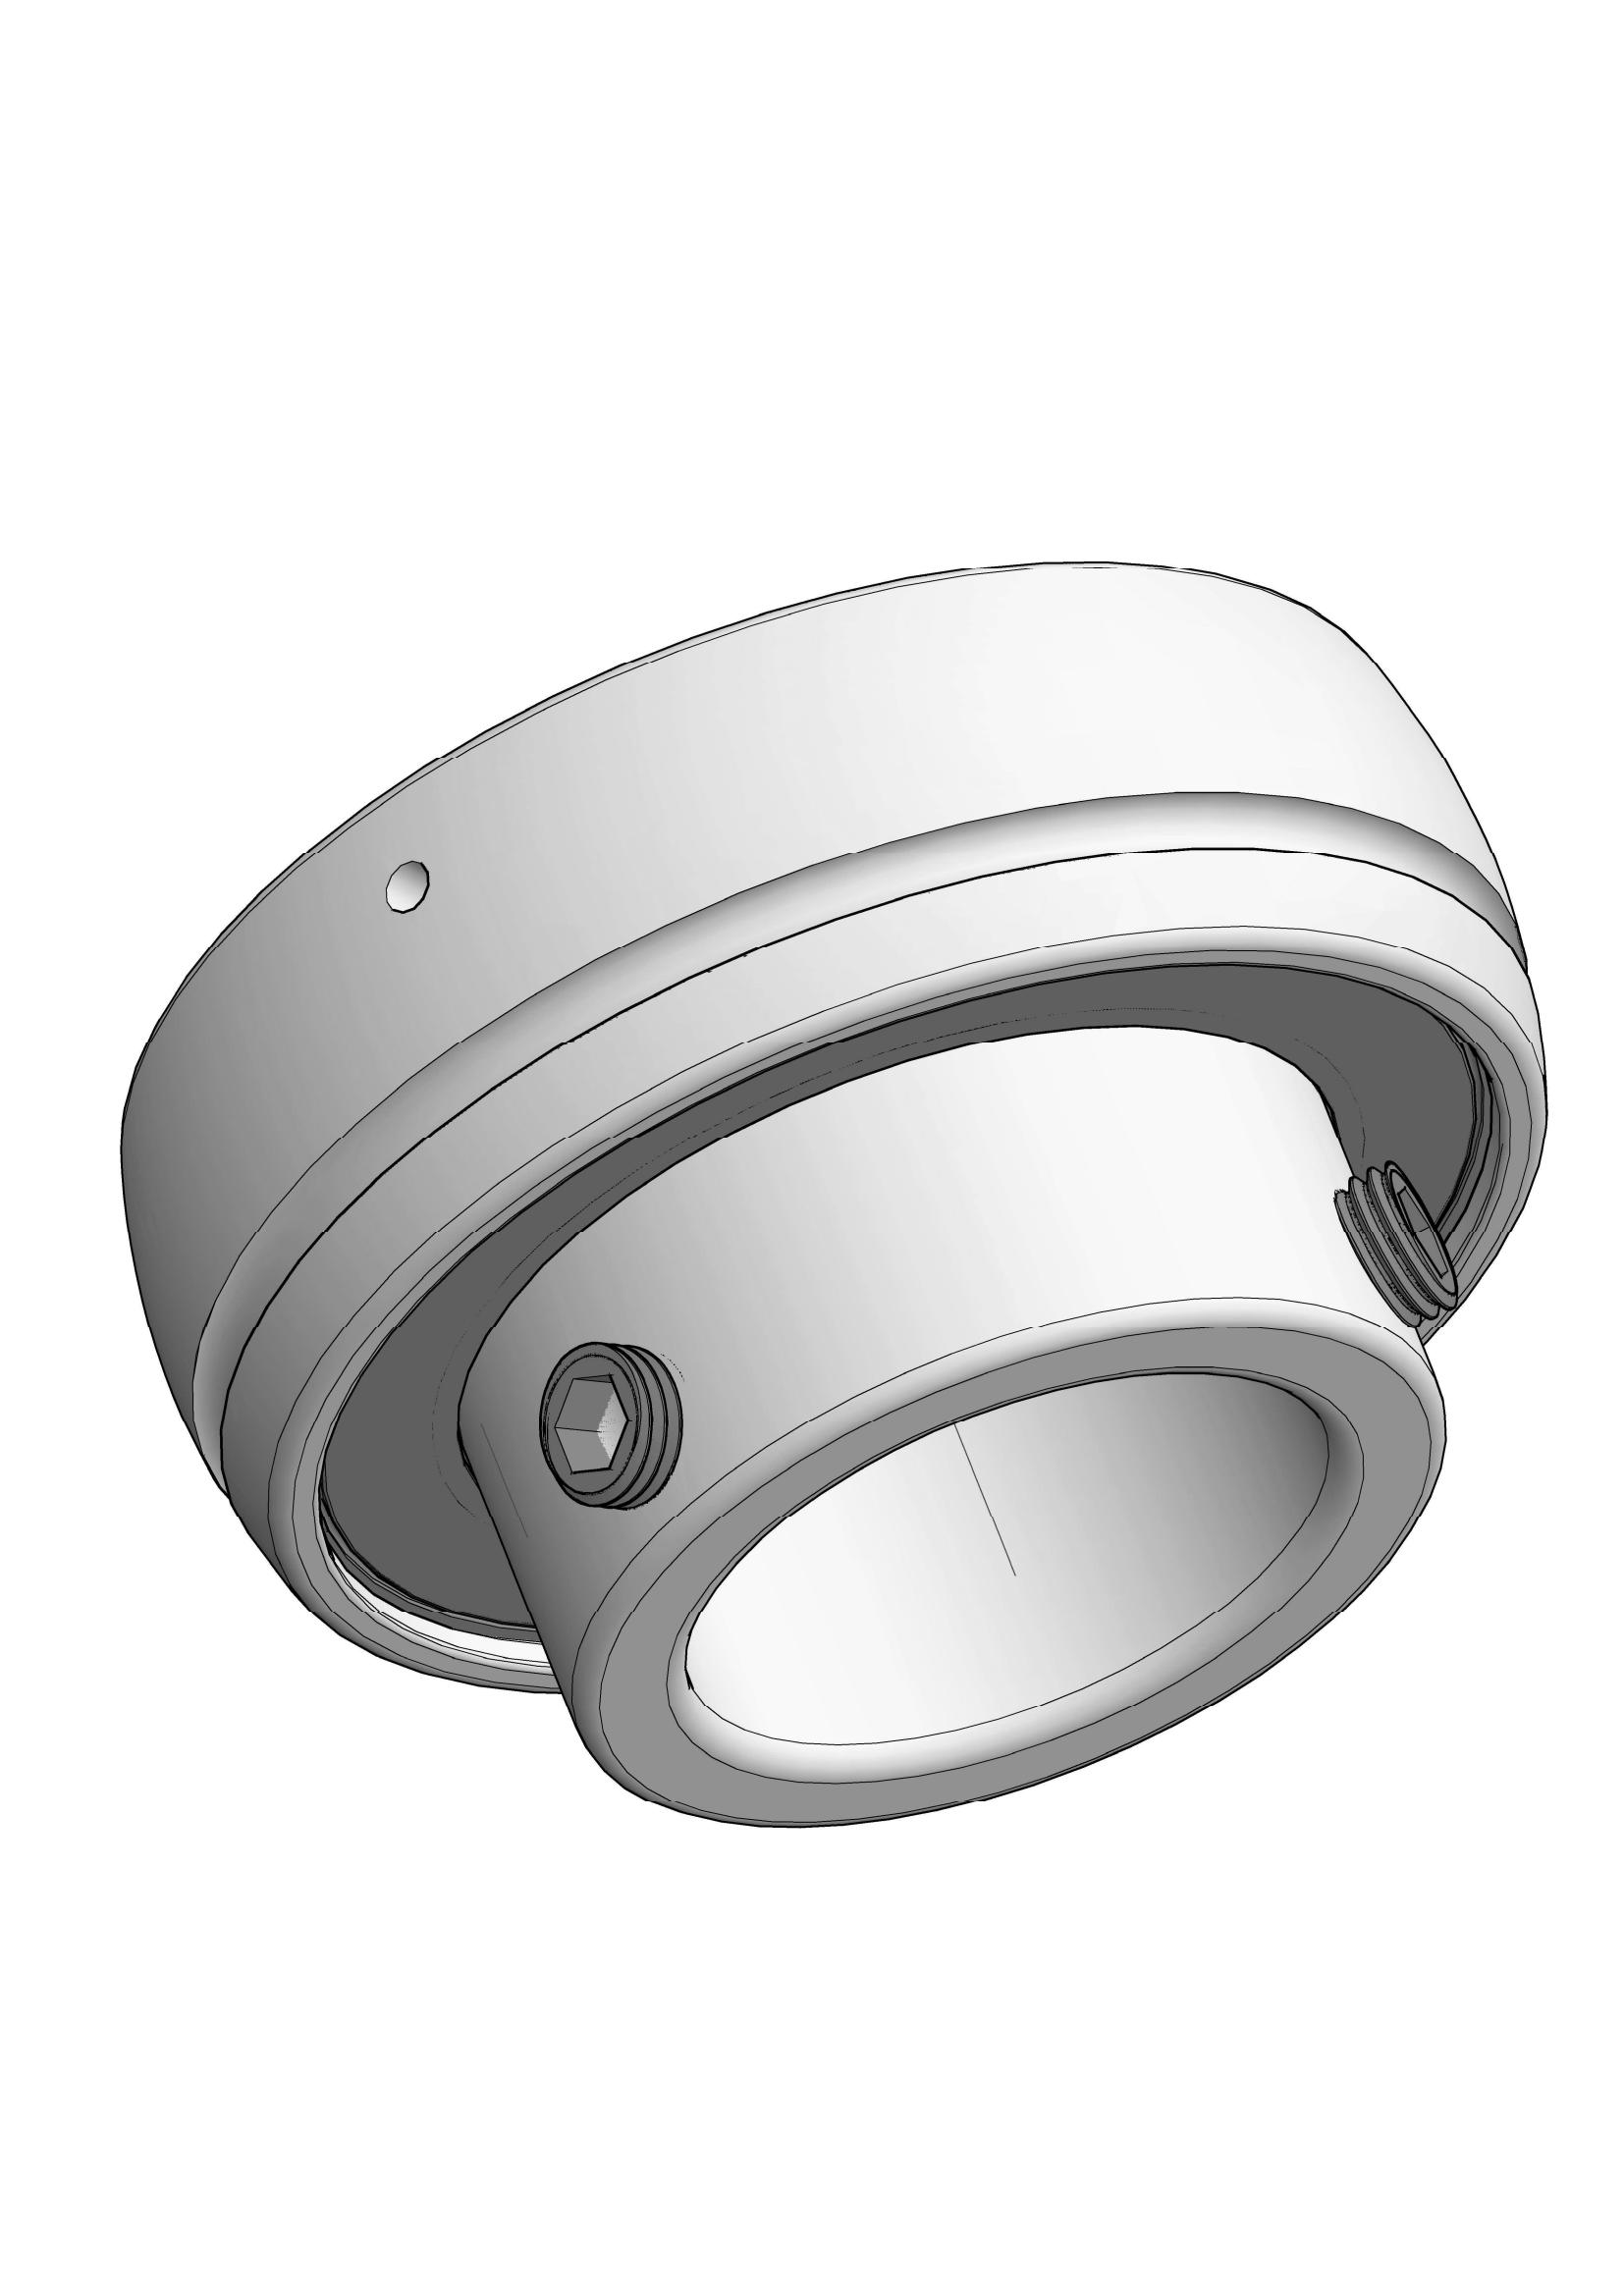 SB203-11 insert ball bearings with Eccentric Collar Lock with 11/16 inch Bore